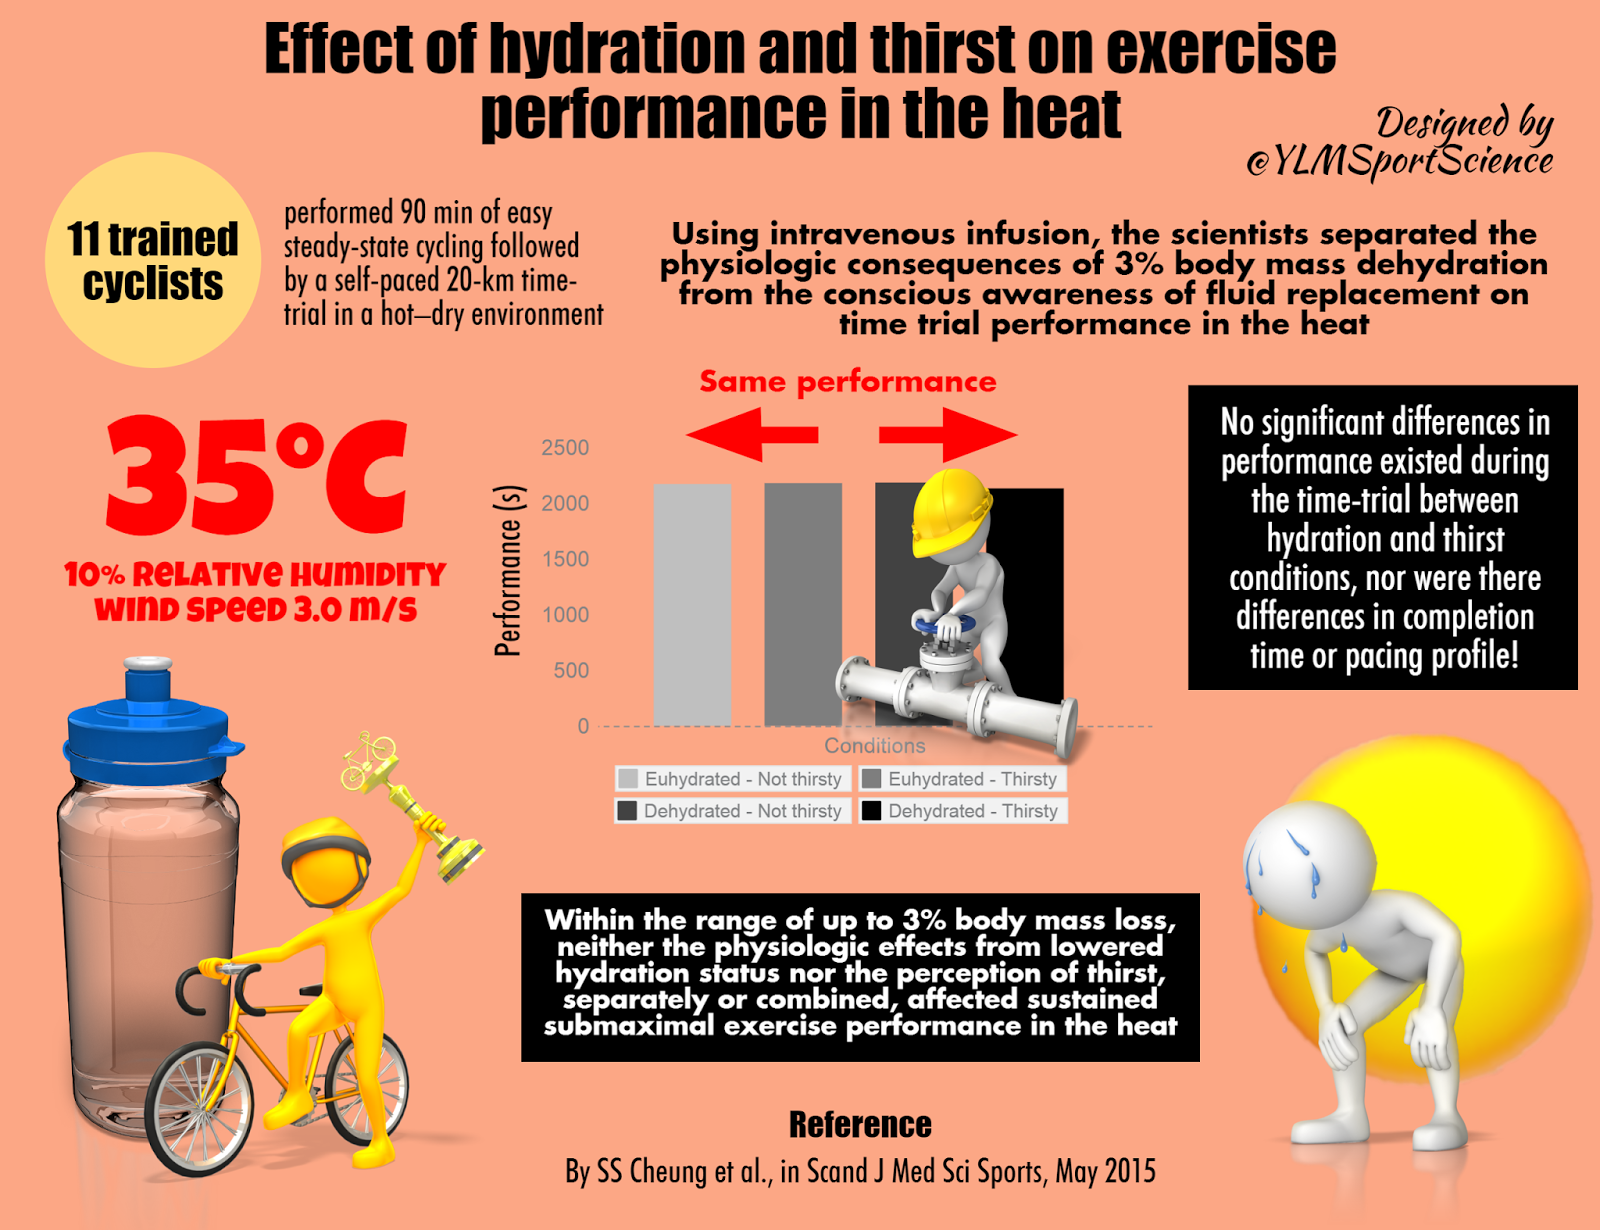 Hydration and performance